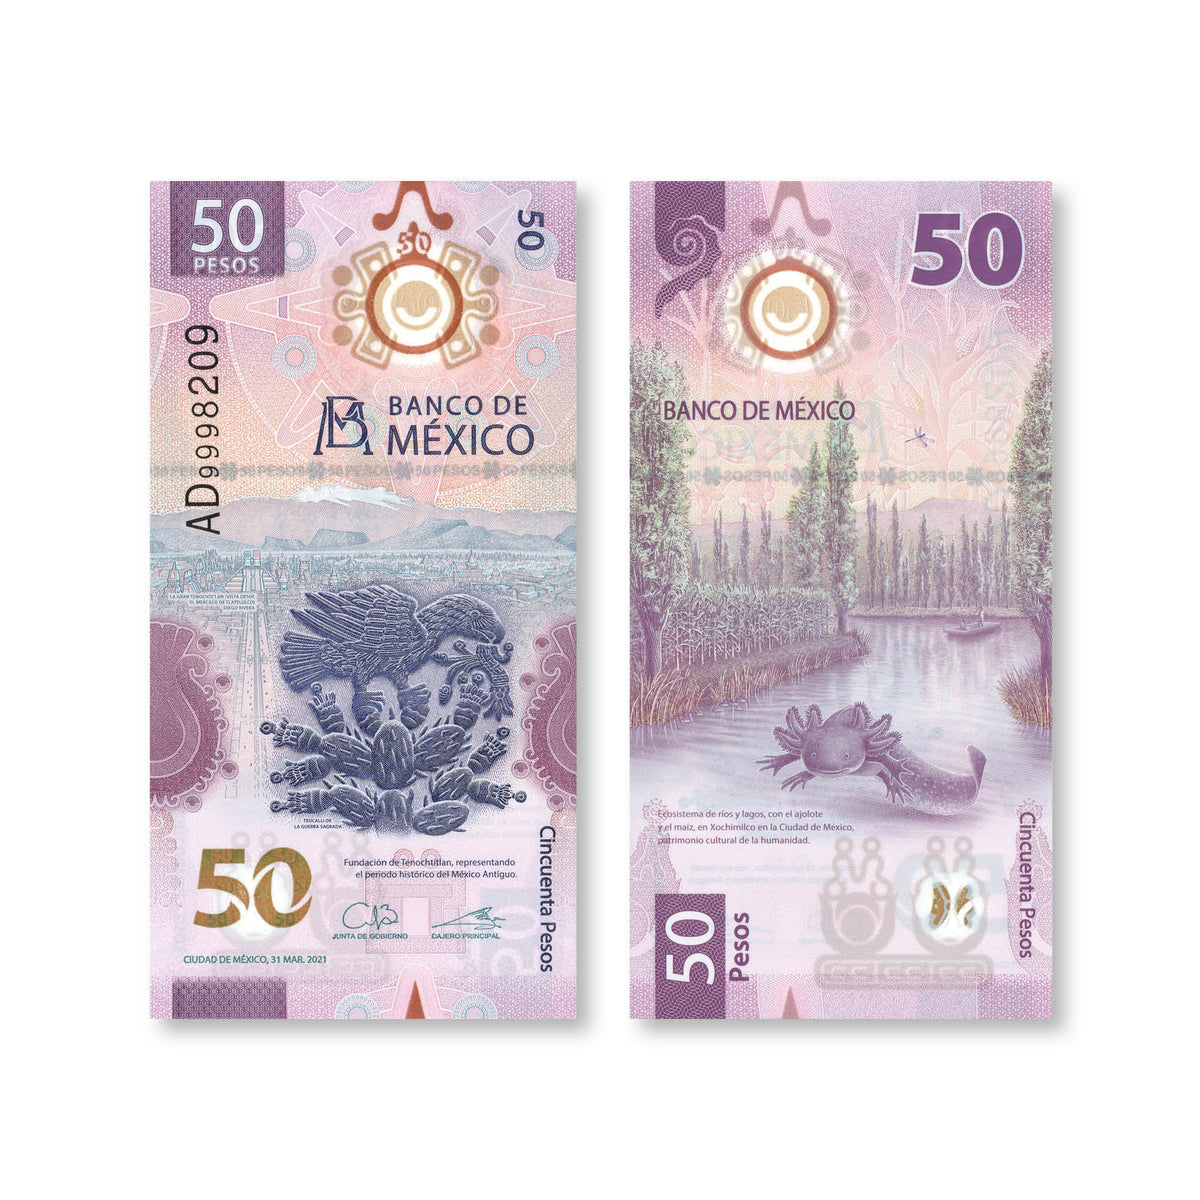 Mexico 50 Pesos, 2021, B714a, IBNS Banknote of the Year 2021, UNC - Robert's World Money - World Banknotes